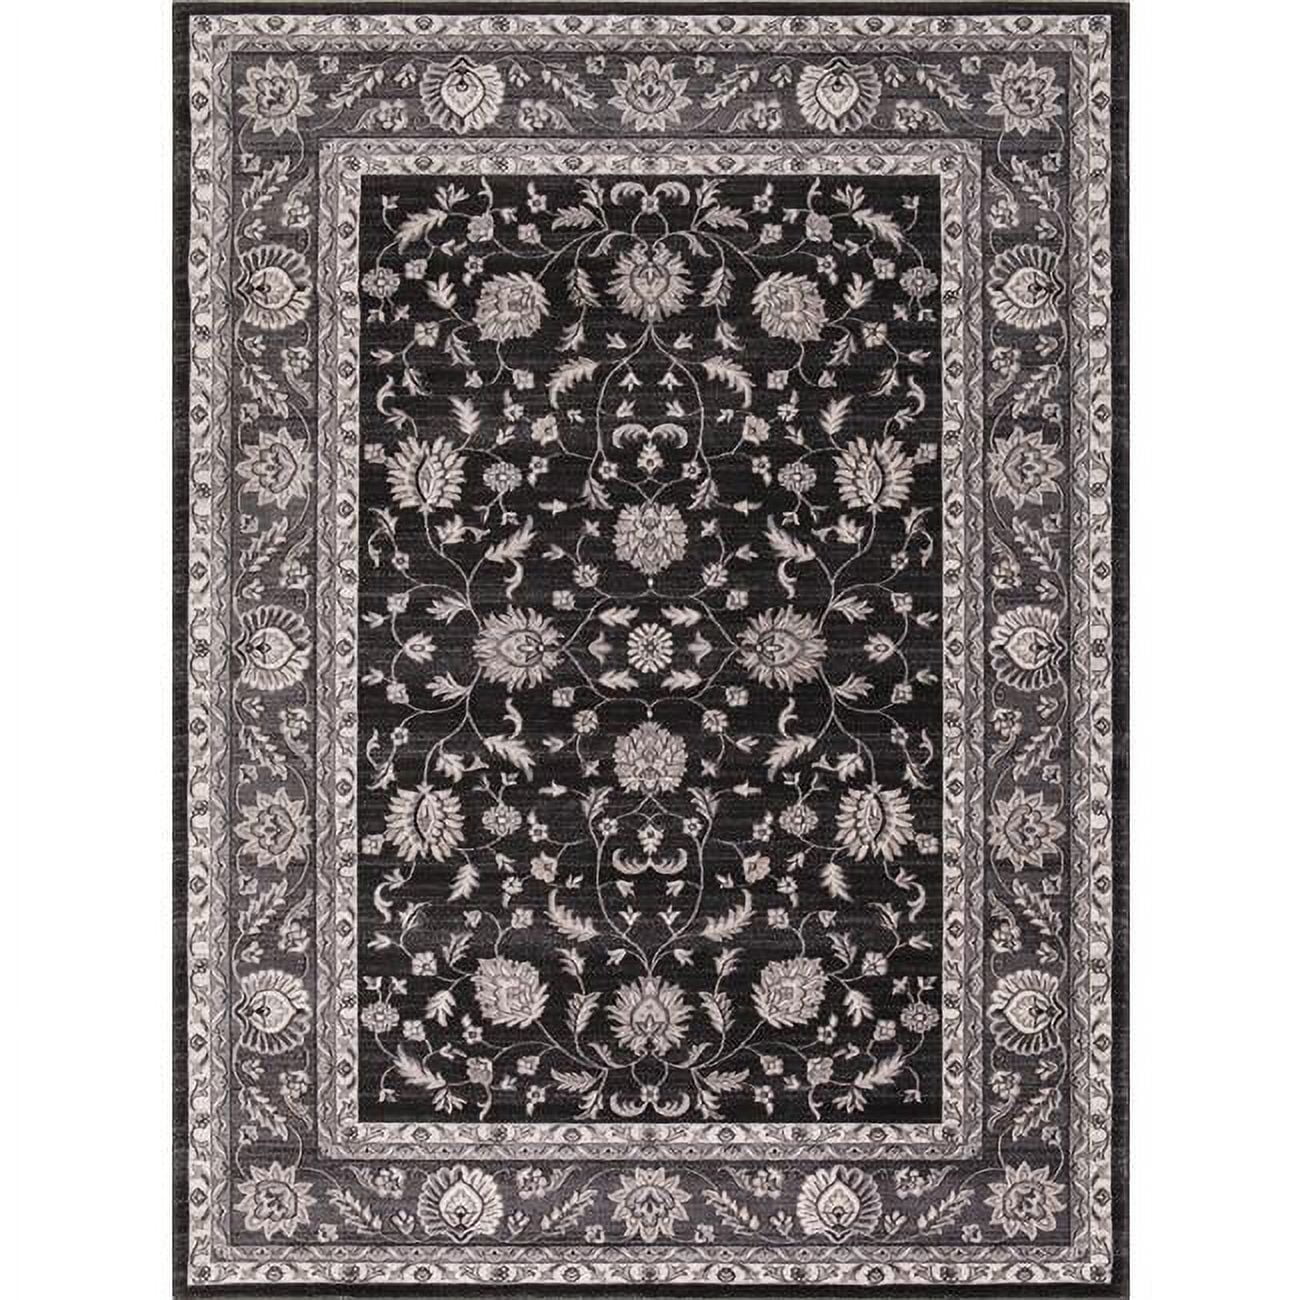 Picture of Concord Global 28234 3 ft. 3 in. x 4 ft. 7 in. Kashan Mahal - Anthracite